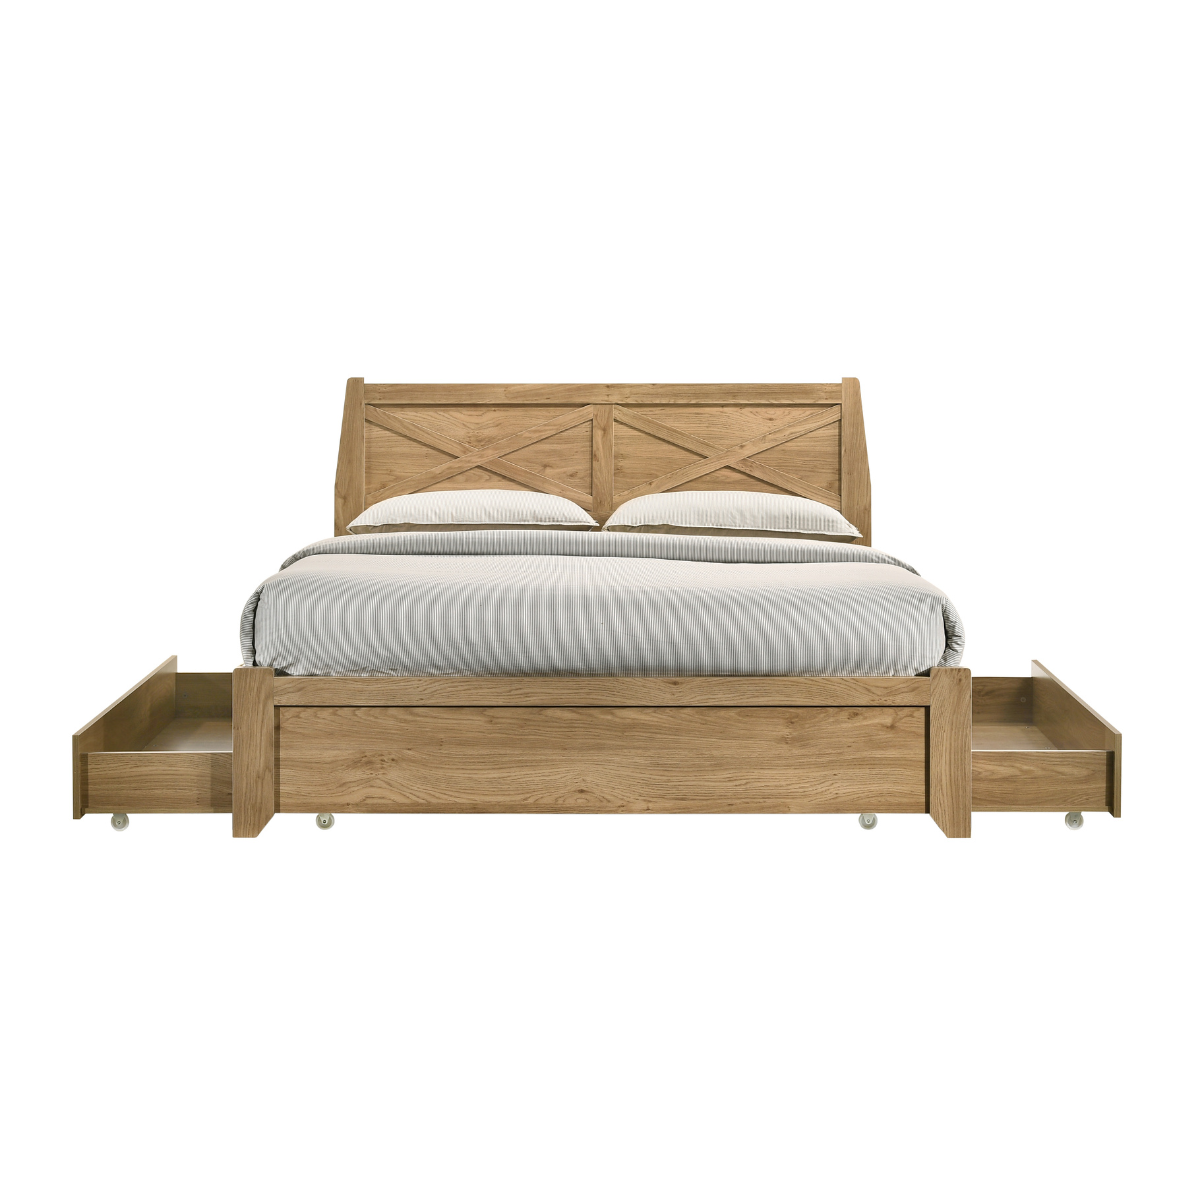 Mica Natural Wooden Bed Frame with Storage Drawers Double - SILBERSHELL